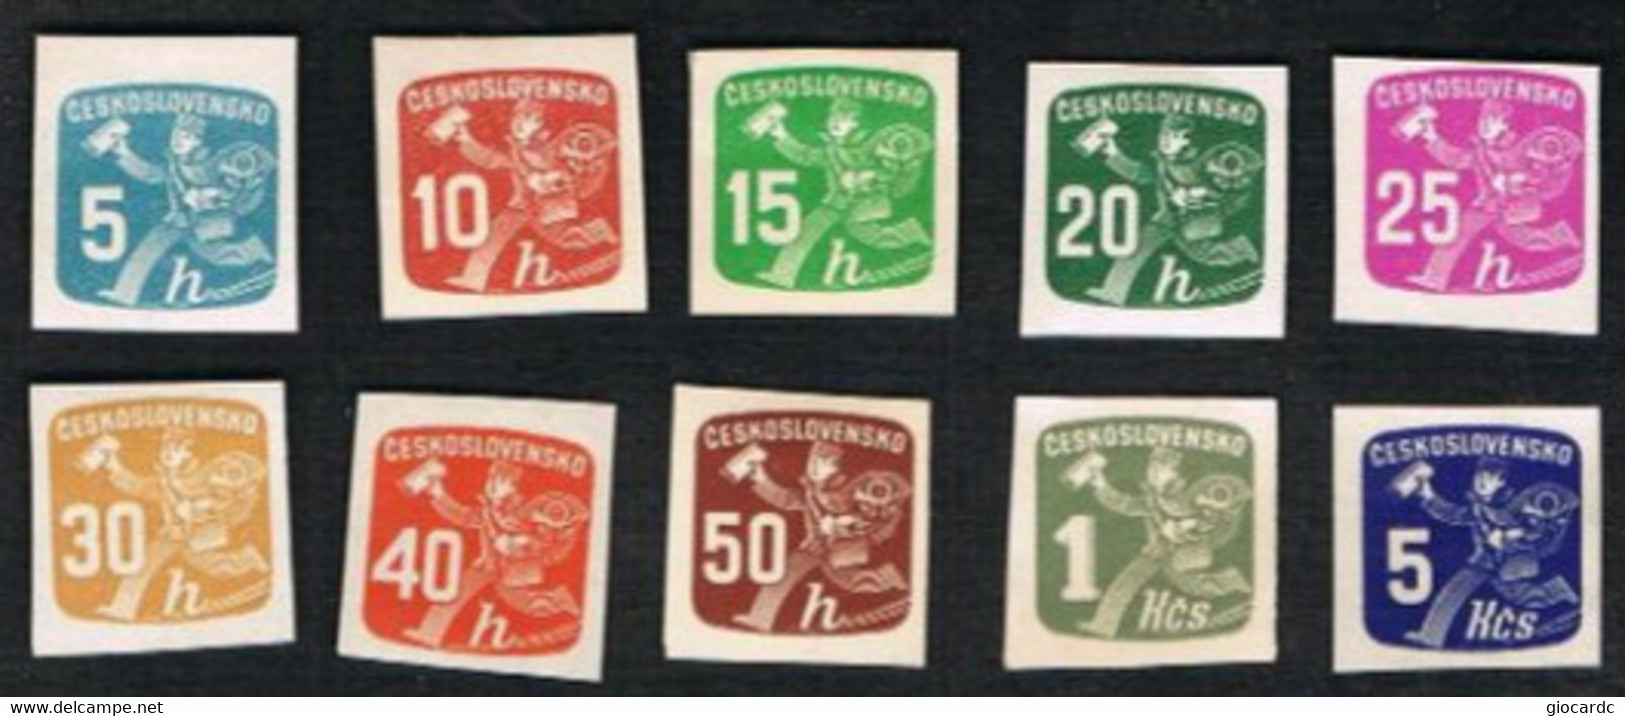 CECOSLOVACCHIA (CZECHOSLOVAKIA) - SG N467.476- 1946 NEWSPAPER STAMPS: MESSENGER (COMPLET SET OF 10) - UNUSED WITHOUT GUM - Zeitungsmarken